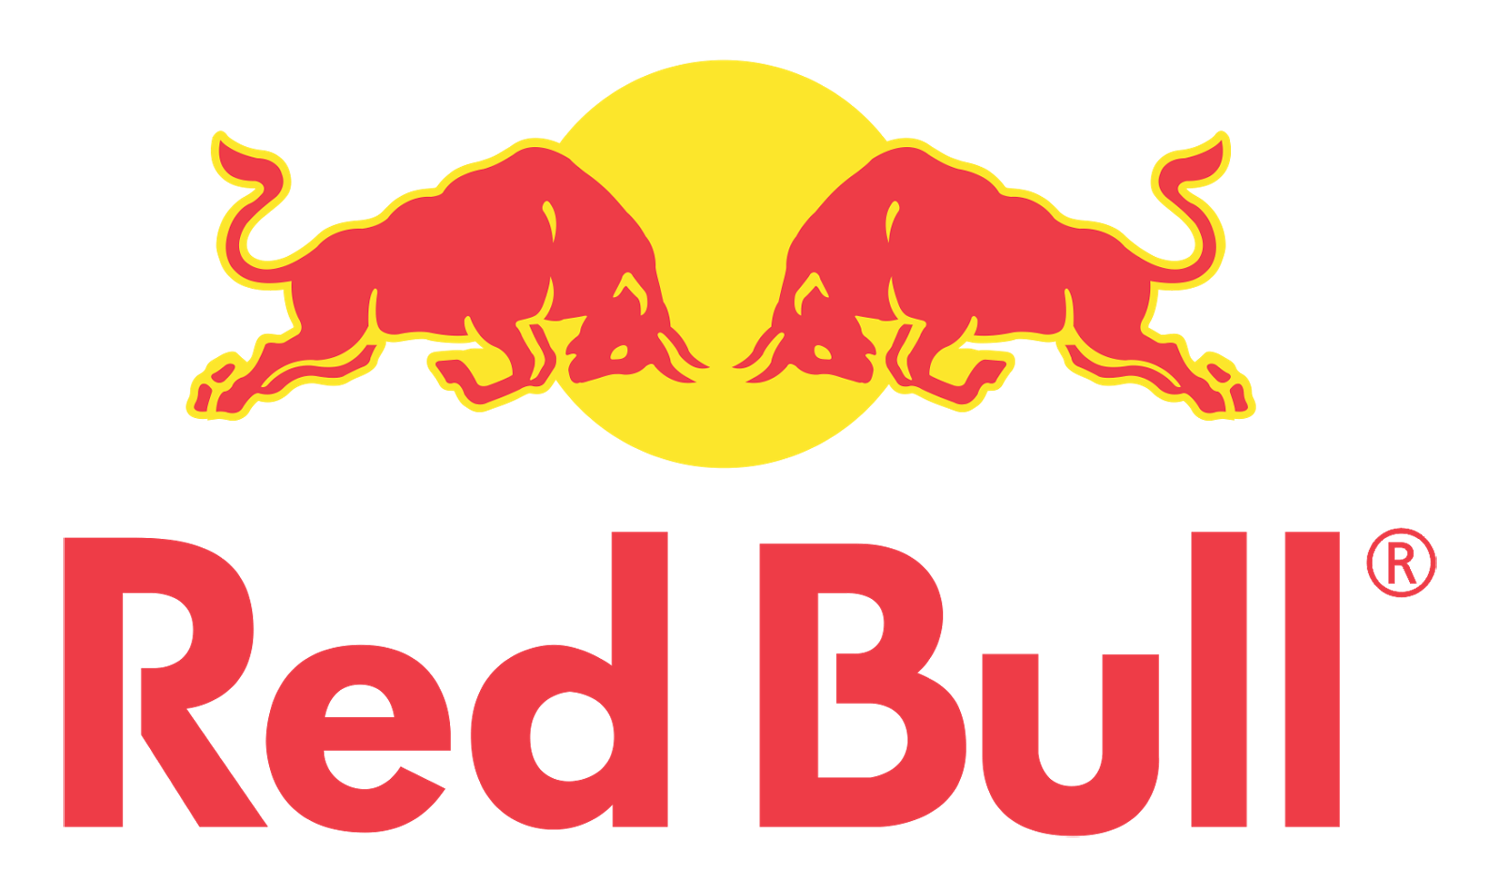 Red Bul Logo - Red Bull Logo, Red Bull Symbol, Meaning, History and Evolution